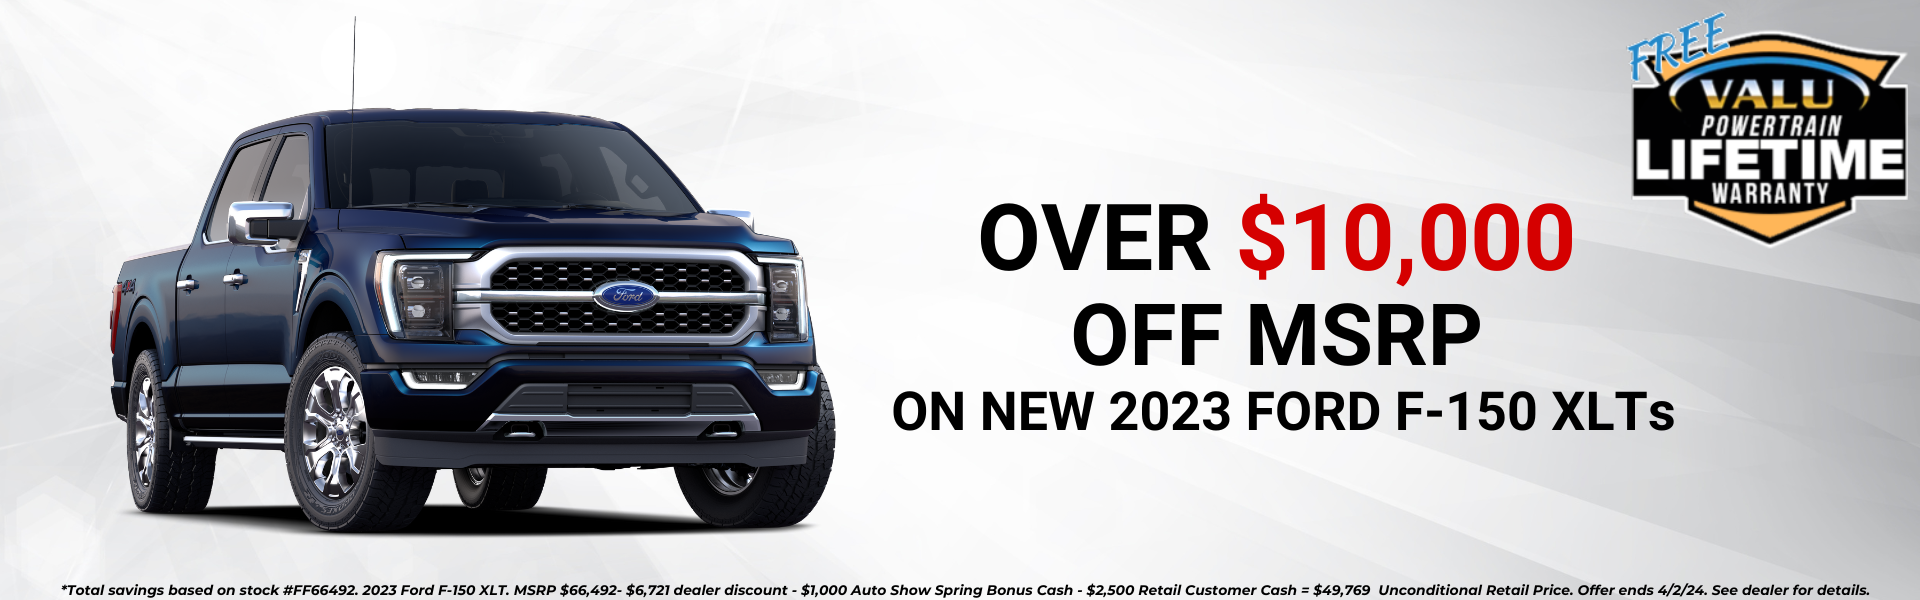 Over $10,000 Off MSRP on new 2023 Ford F-150